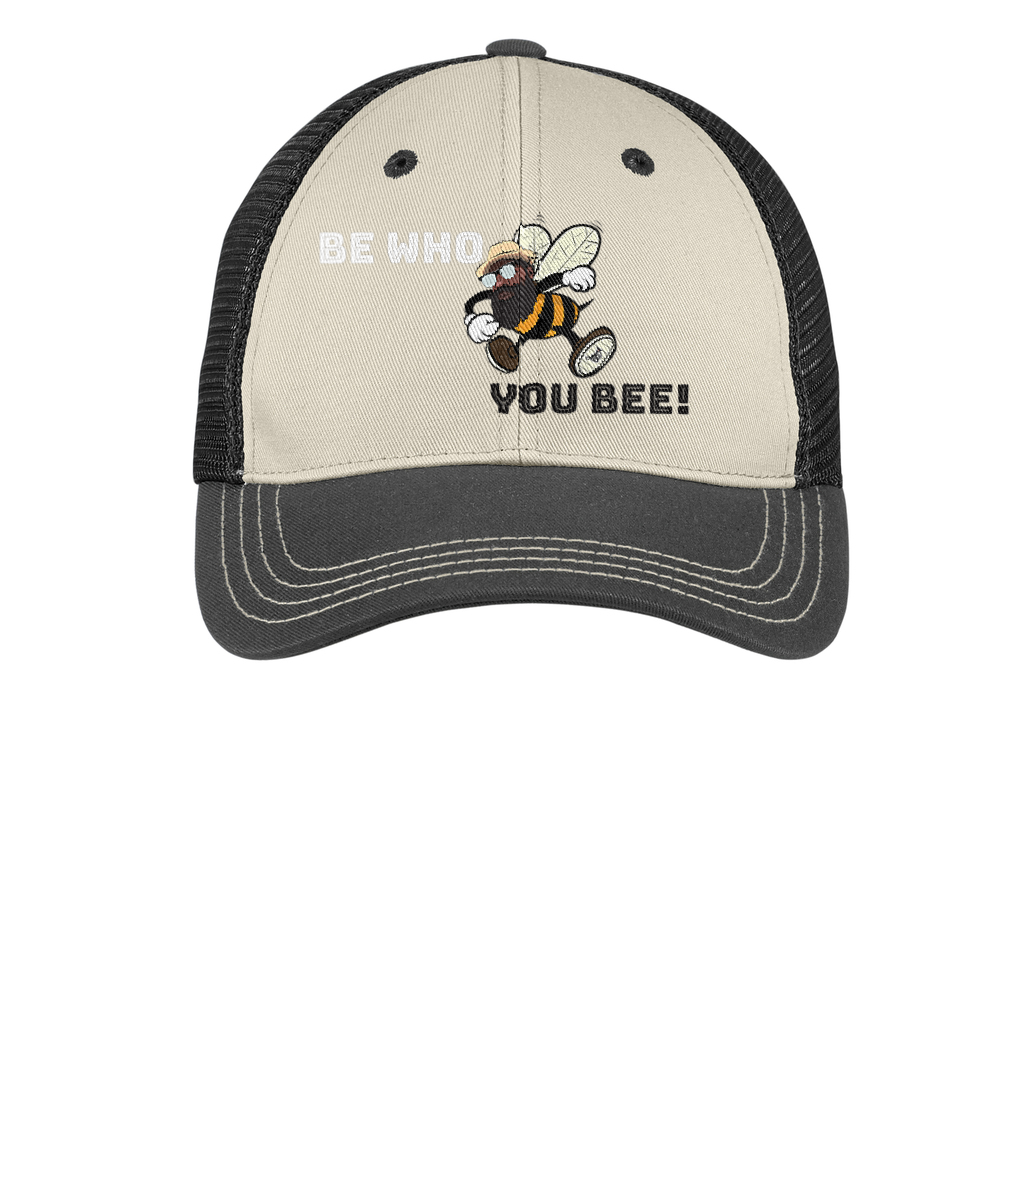 Be Who You Bee! ® Tri-Tone Mesh Back Cap or Similar